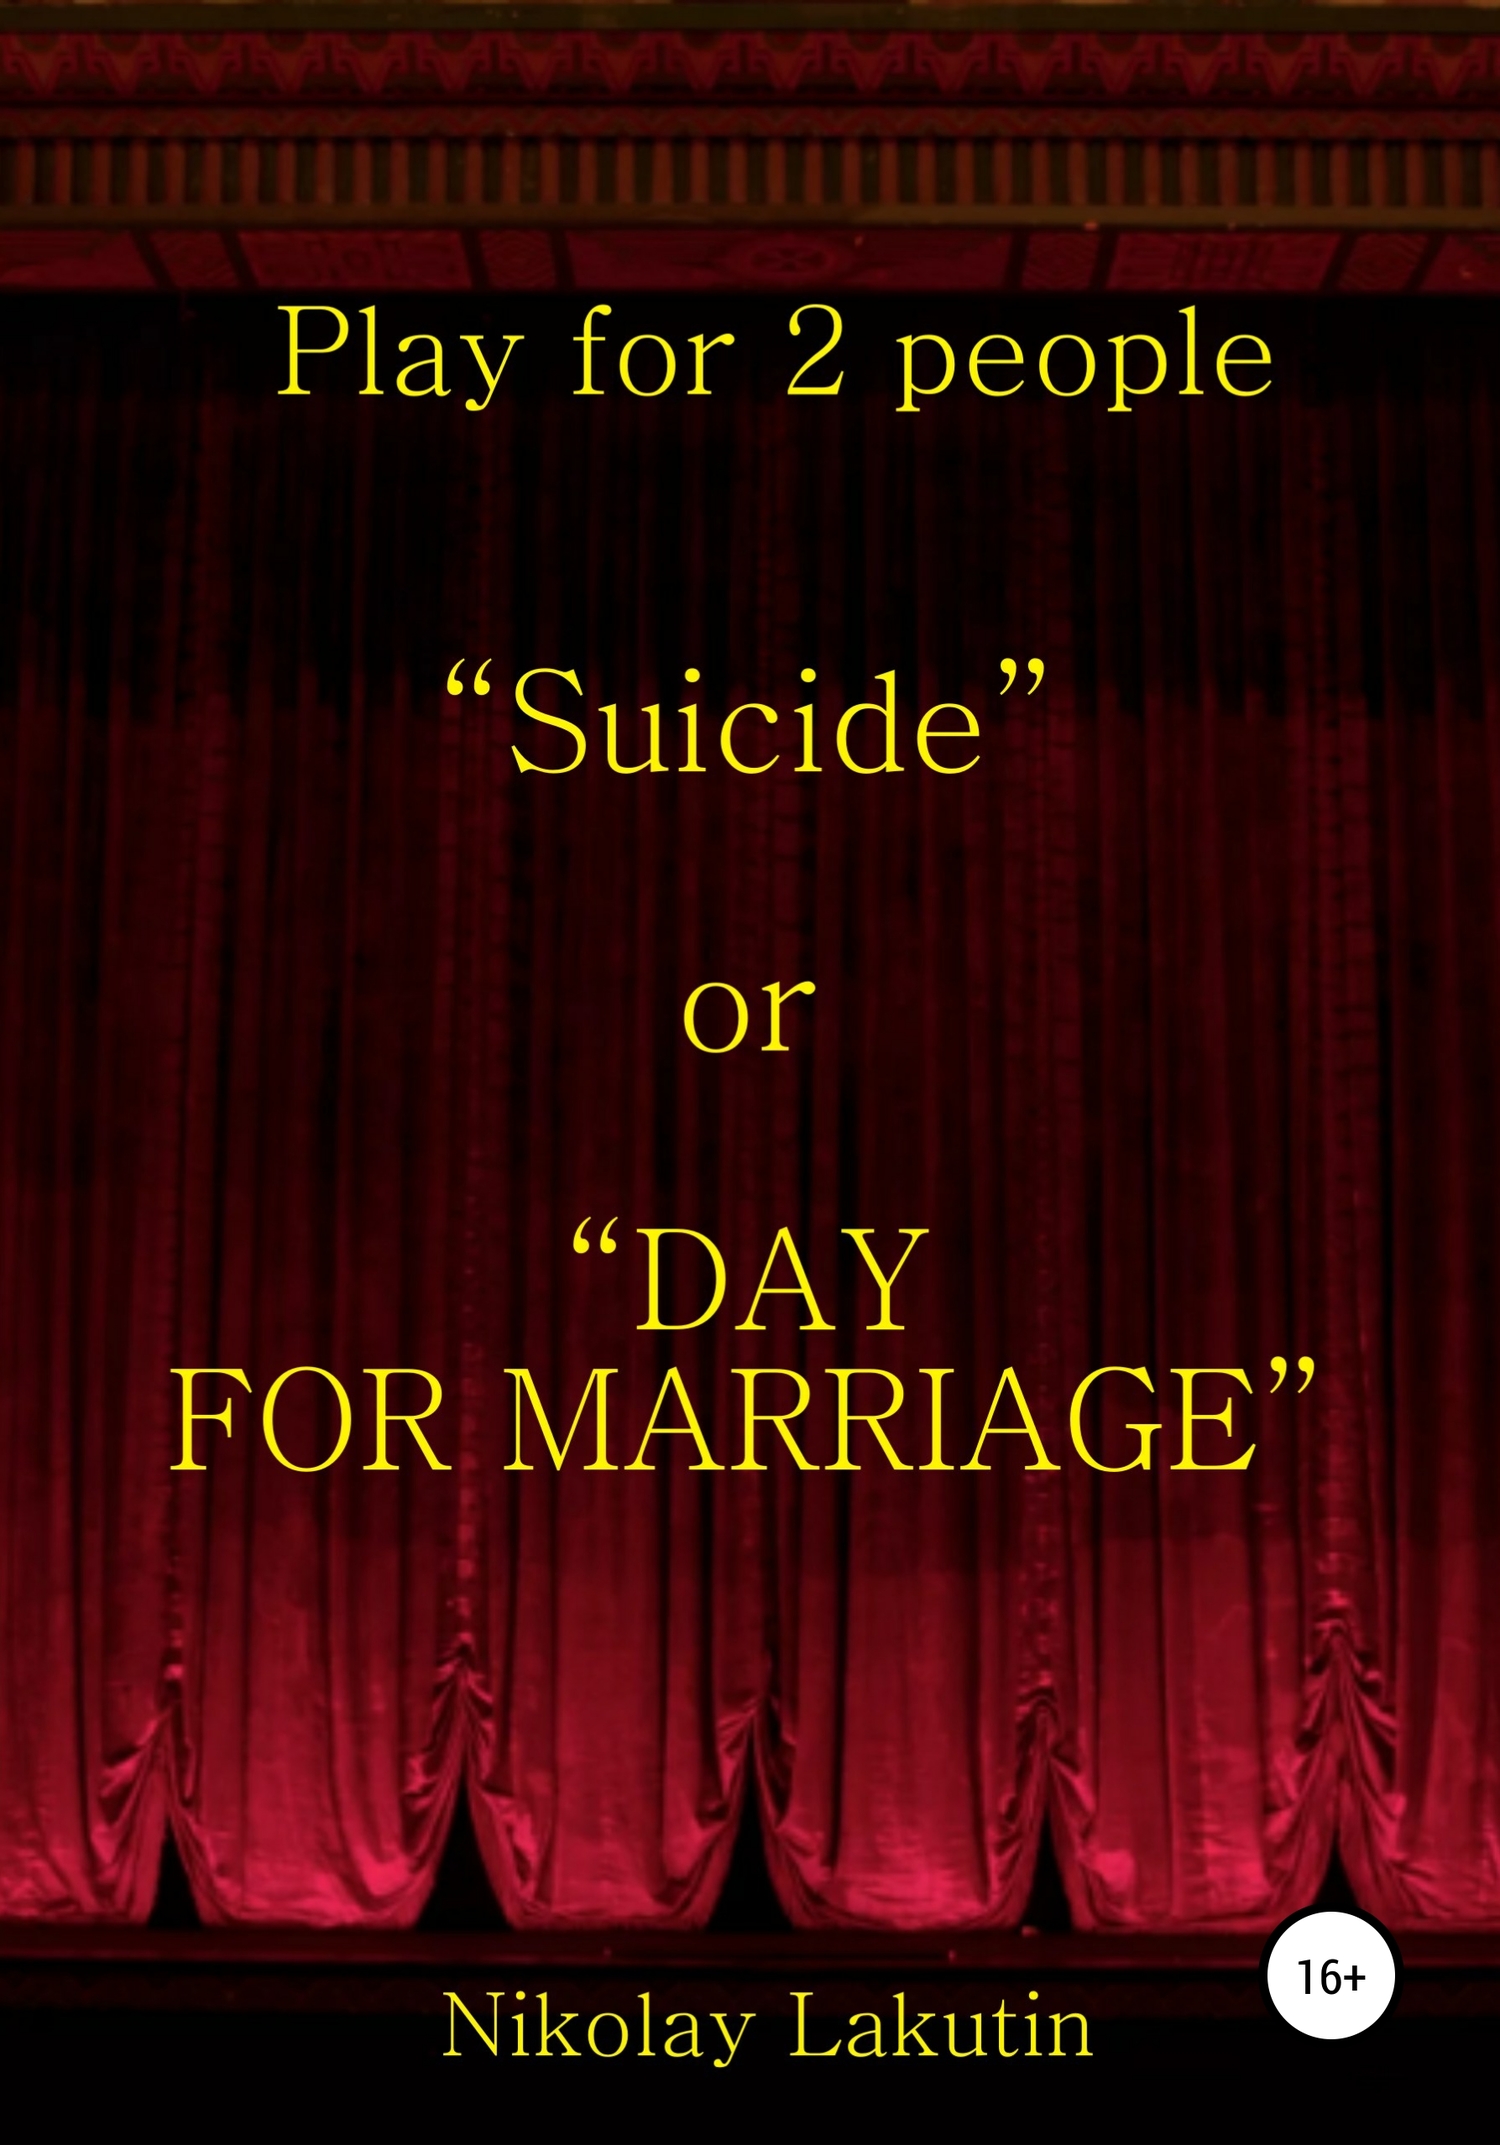 Suicide or DAY FOR MARRIAGE. Play for 2 people - Николай Владимирович Лакутин